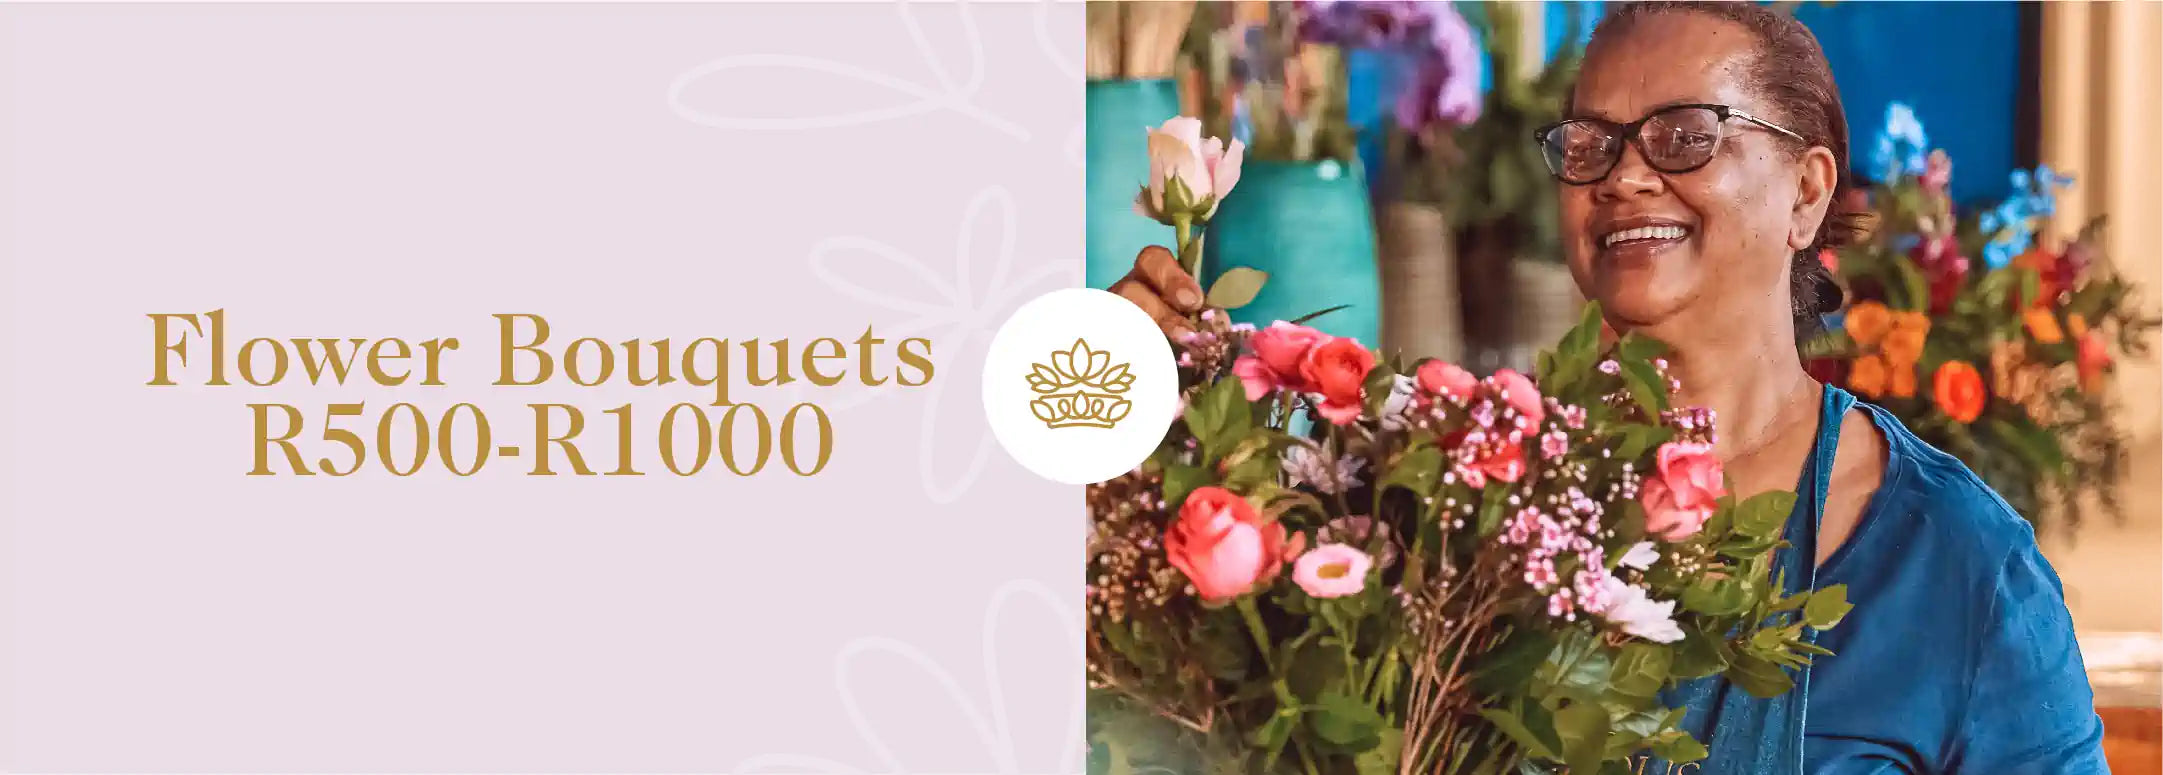 A joyful woman with glasses arranges a vibrant assortment of flower bouquets in a shop, displaying roses and other colorful flowers. Prices range from R500 to R1000, reflecting the collection's diversity and affordability. Fabulous Flowers and Gifts.